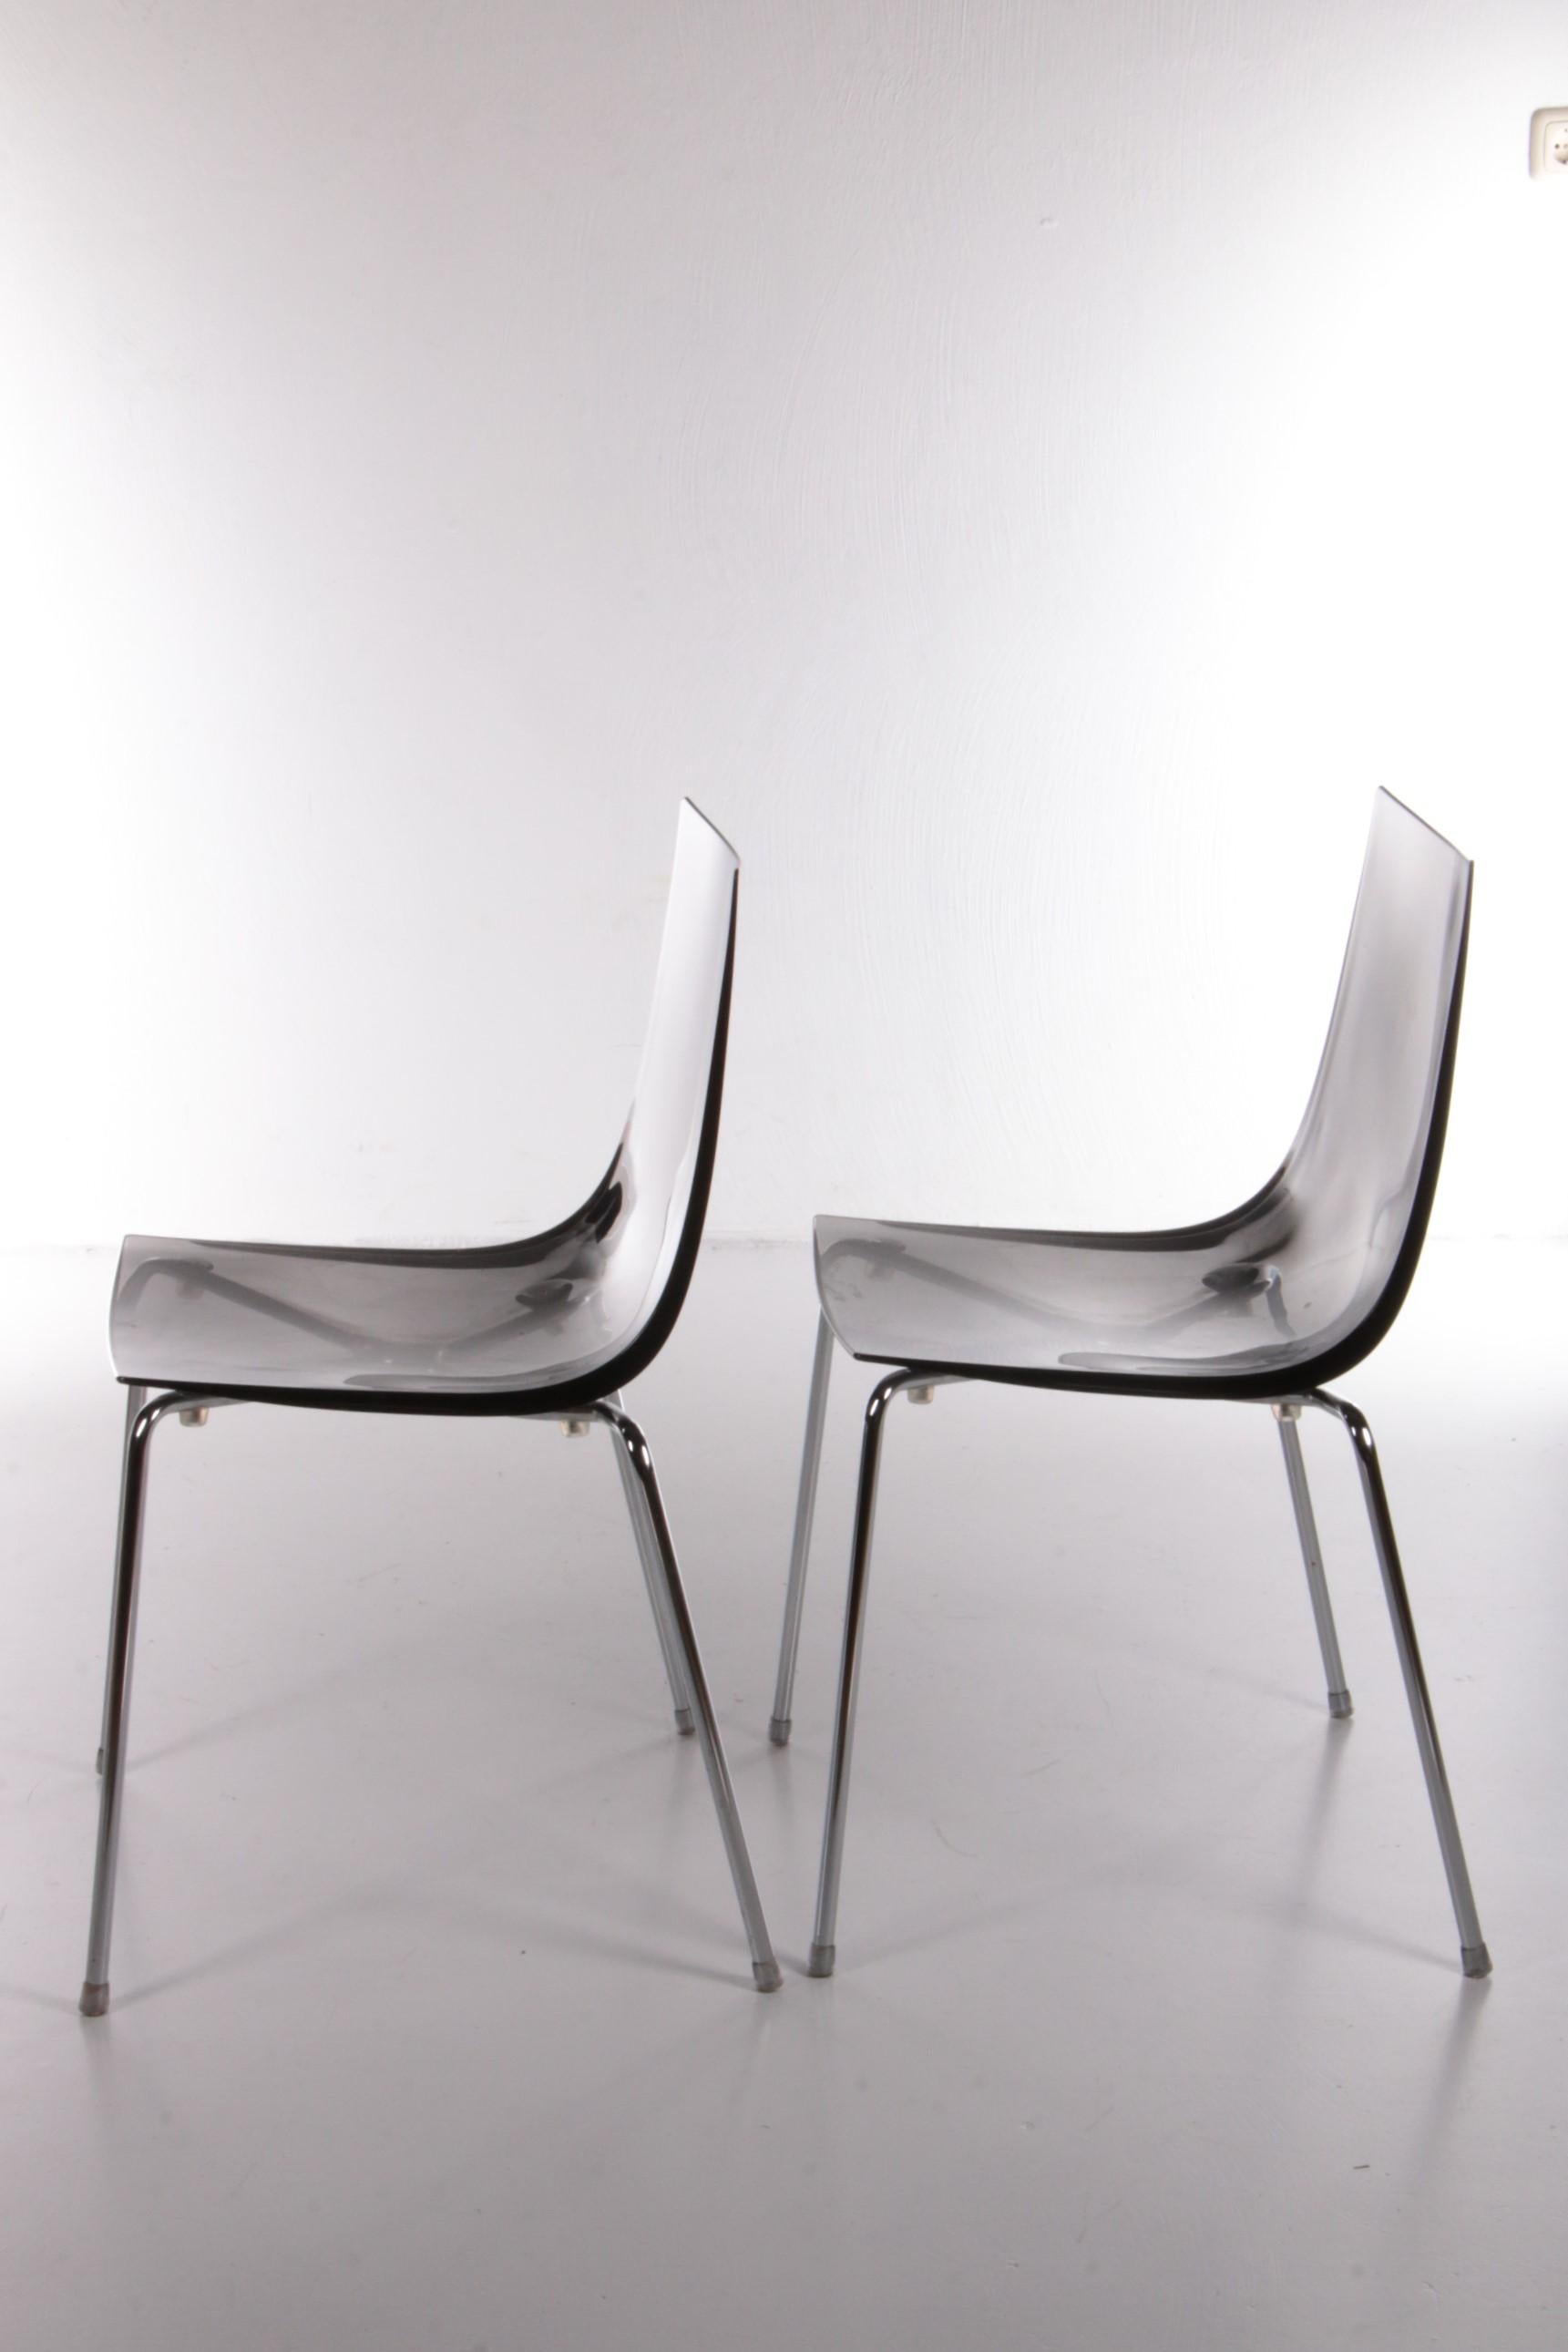 Late 20th Century Set of Two Italian Dining Room Chairs by Roberto Foschia, 2007